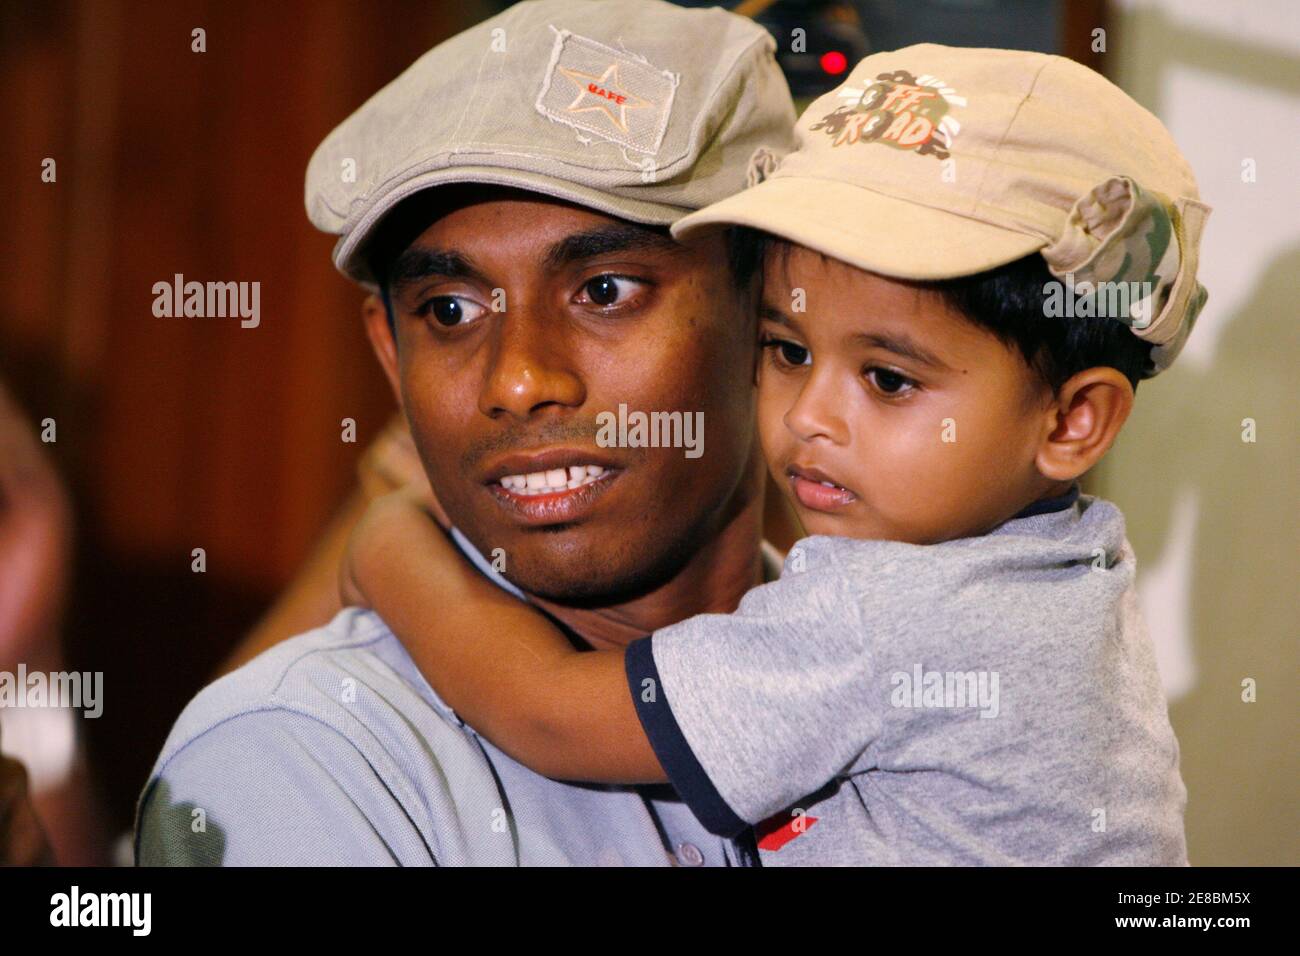 Thilan Thushara, a member of the Sri Lankan cricket team, holds his son as he arrives at Colombo airport in Sri Lanka, after the attack against his team yesterday morning in Pakistan March 4, 2009. Pakistani police hunted on Wednesday for the gunmen who mounted a bold attack on Sri Lanka's cricket team in Lahore and officials scrambled to figure out who was behind it. The attack killed eight people, six of them Pakistani police. Six members of the Sri Lankan team and a British coach were wounded in the daylight attack as their bus approached the cricket stadium.      REUTERS/Nir Elias (SRI LAN Stock Photo